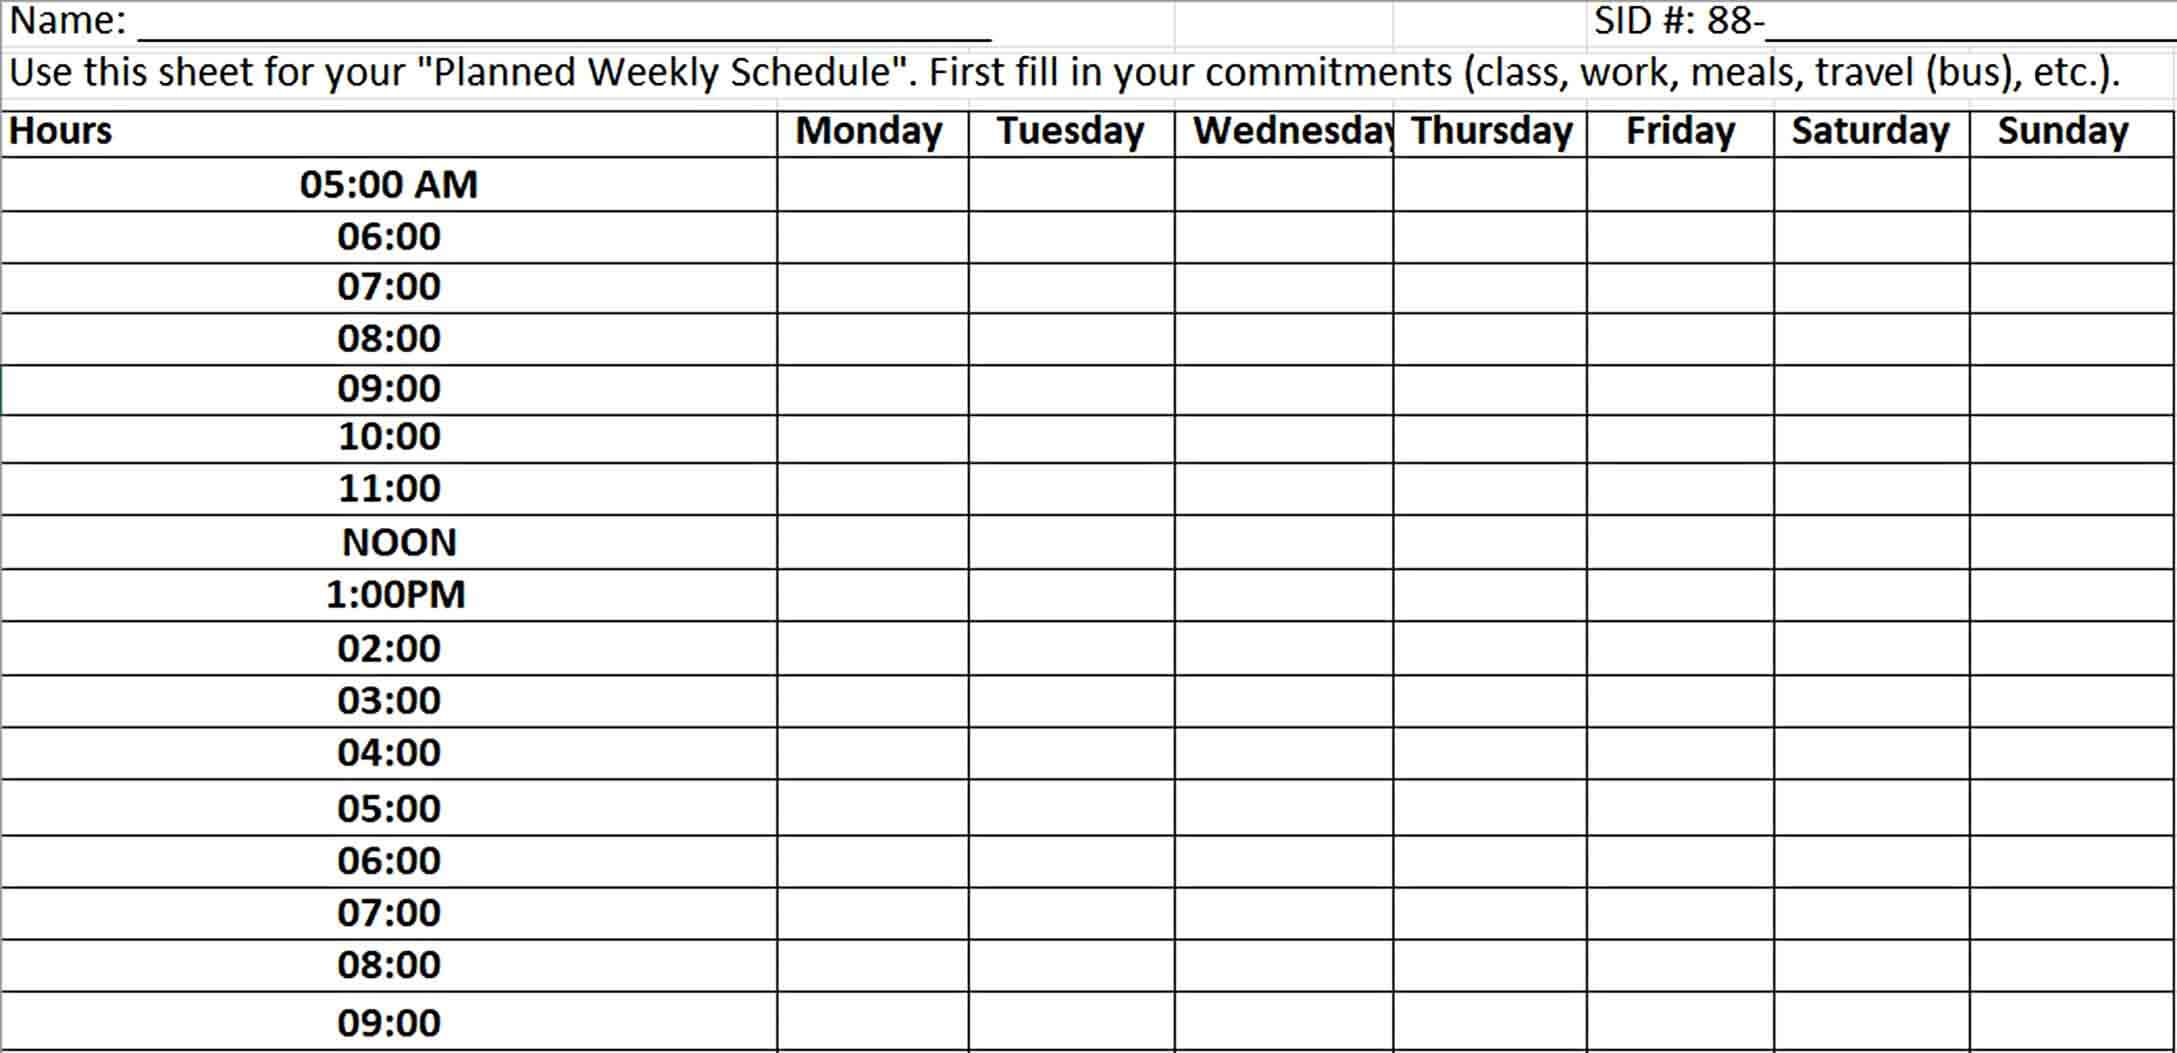 Weekly Planned Schedule Template Excel